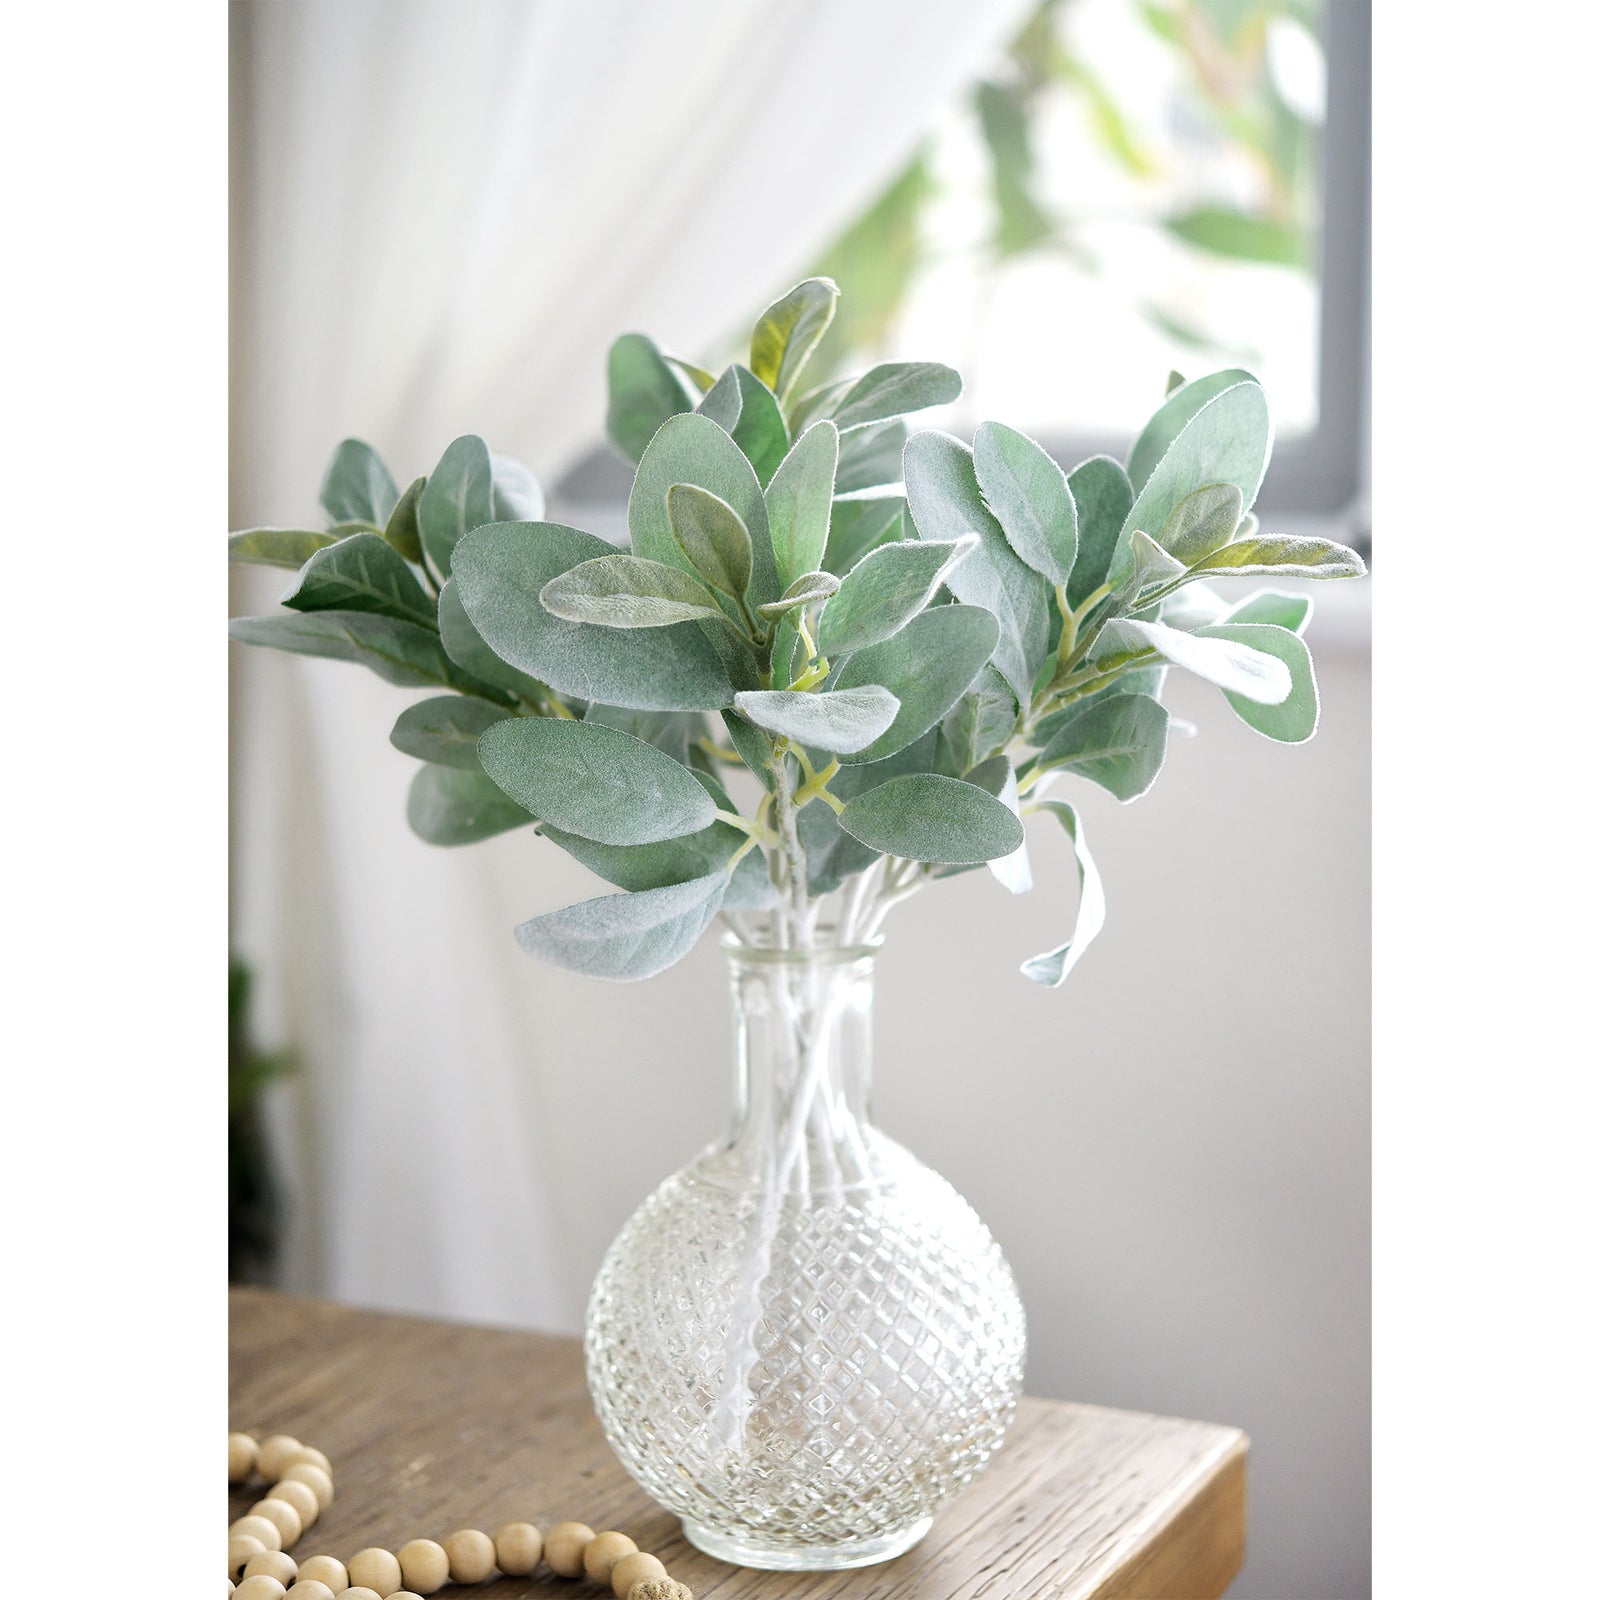 FiveSeasonStuff Sage Green Lamb's Ear Artificial Greenery Bush Plants for Wedding Flower Fillers DIY Bouquets and Floral Arrangements (6 Stems 14 inches Tall)